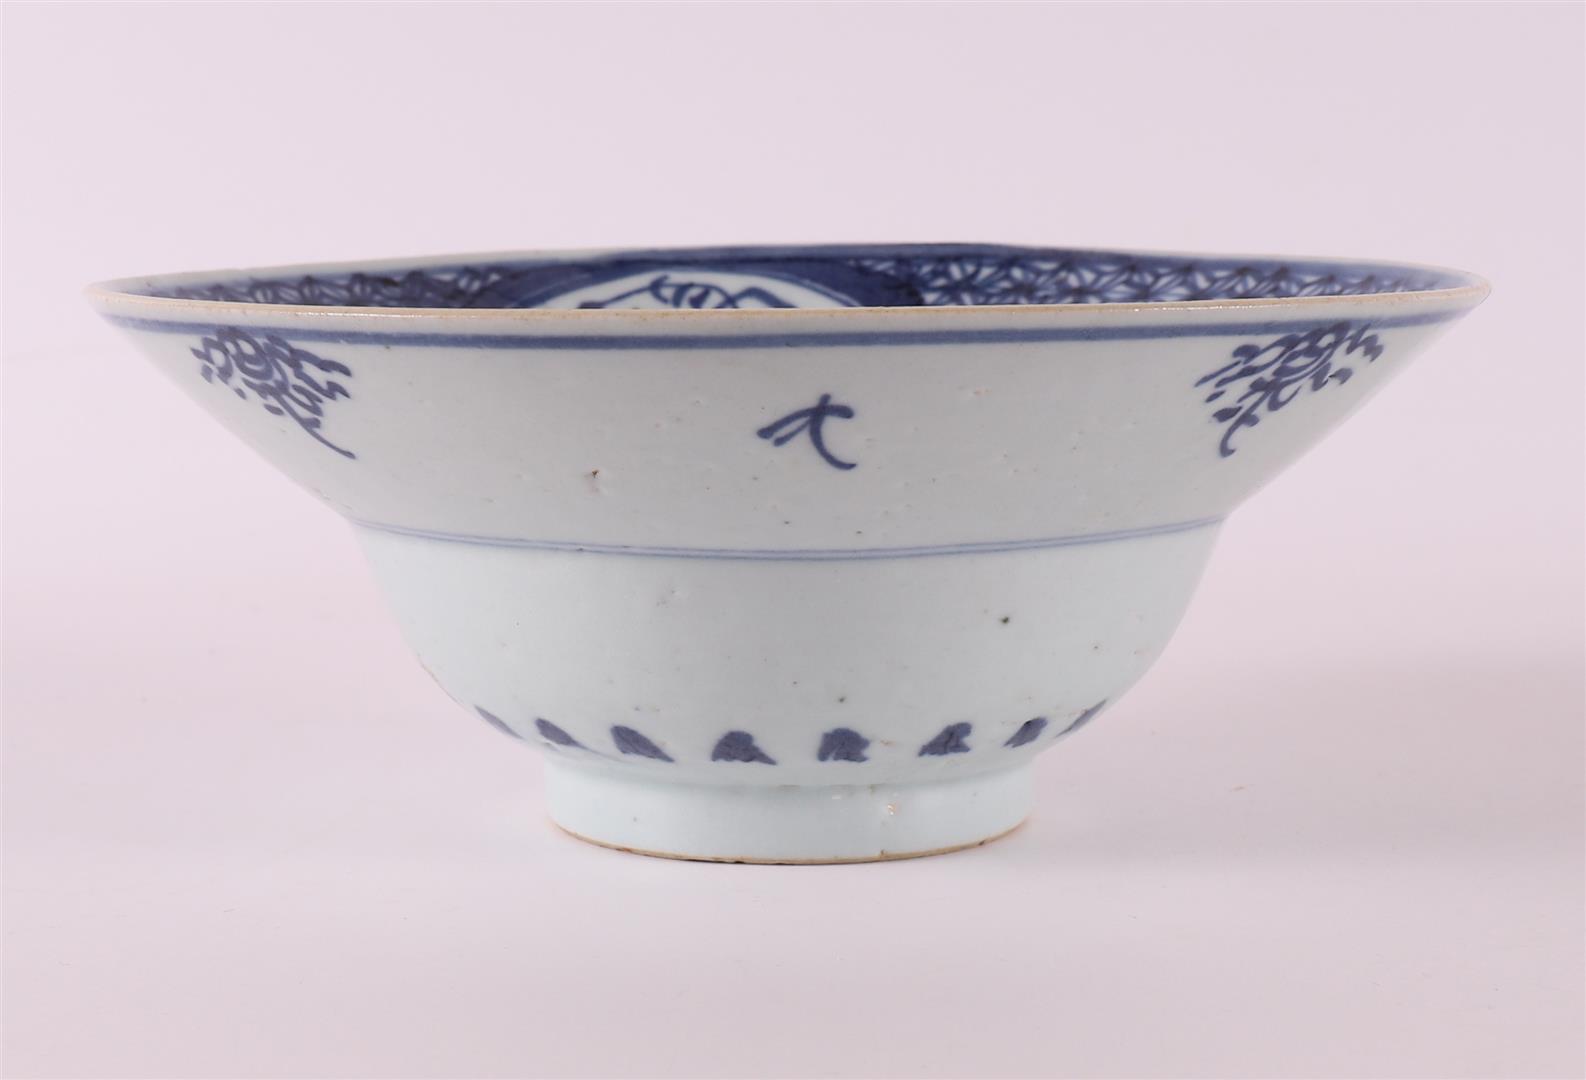 A blue and white porcelain hooded bowl. China, 'so-called Kitchen Ming', 17th ce - Image 5 of 6